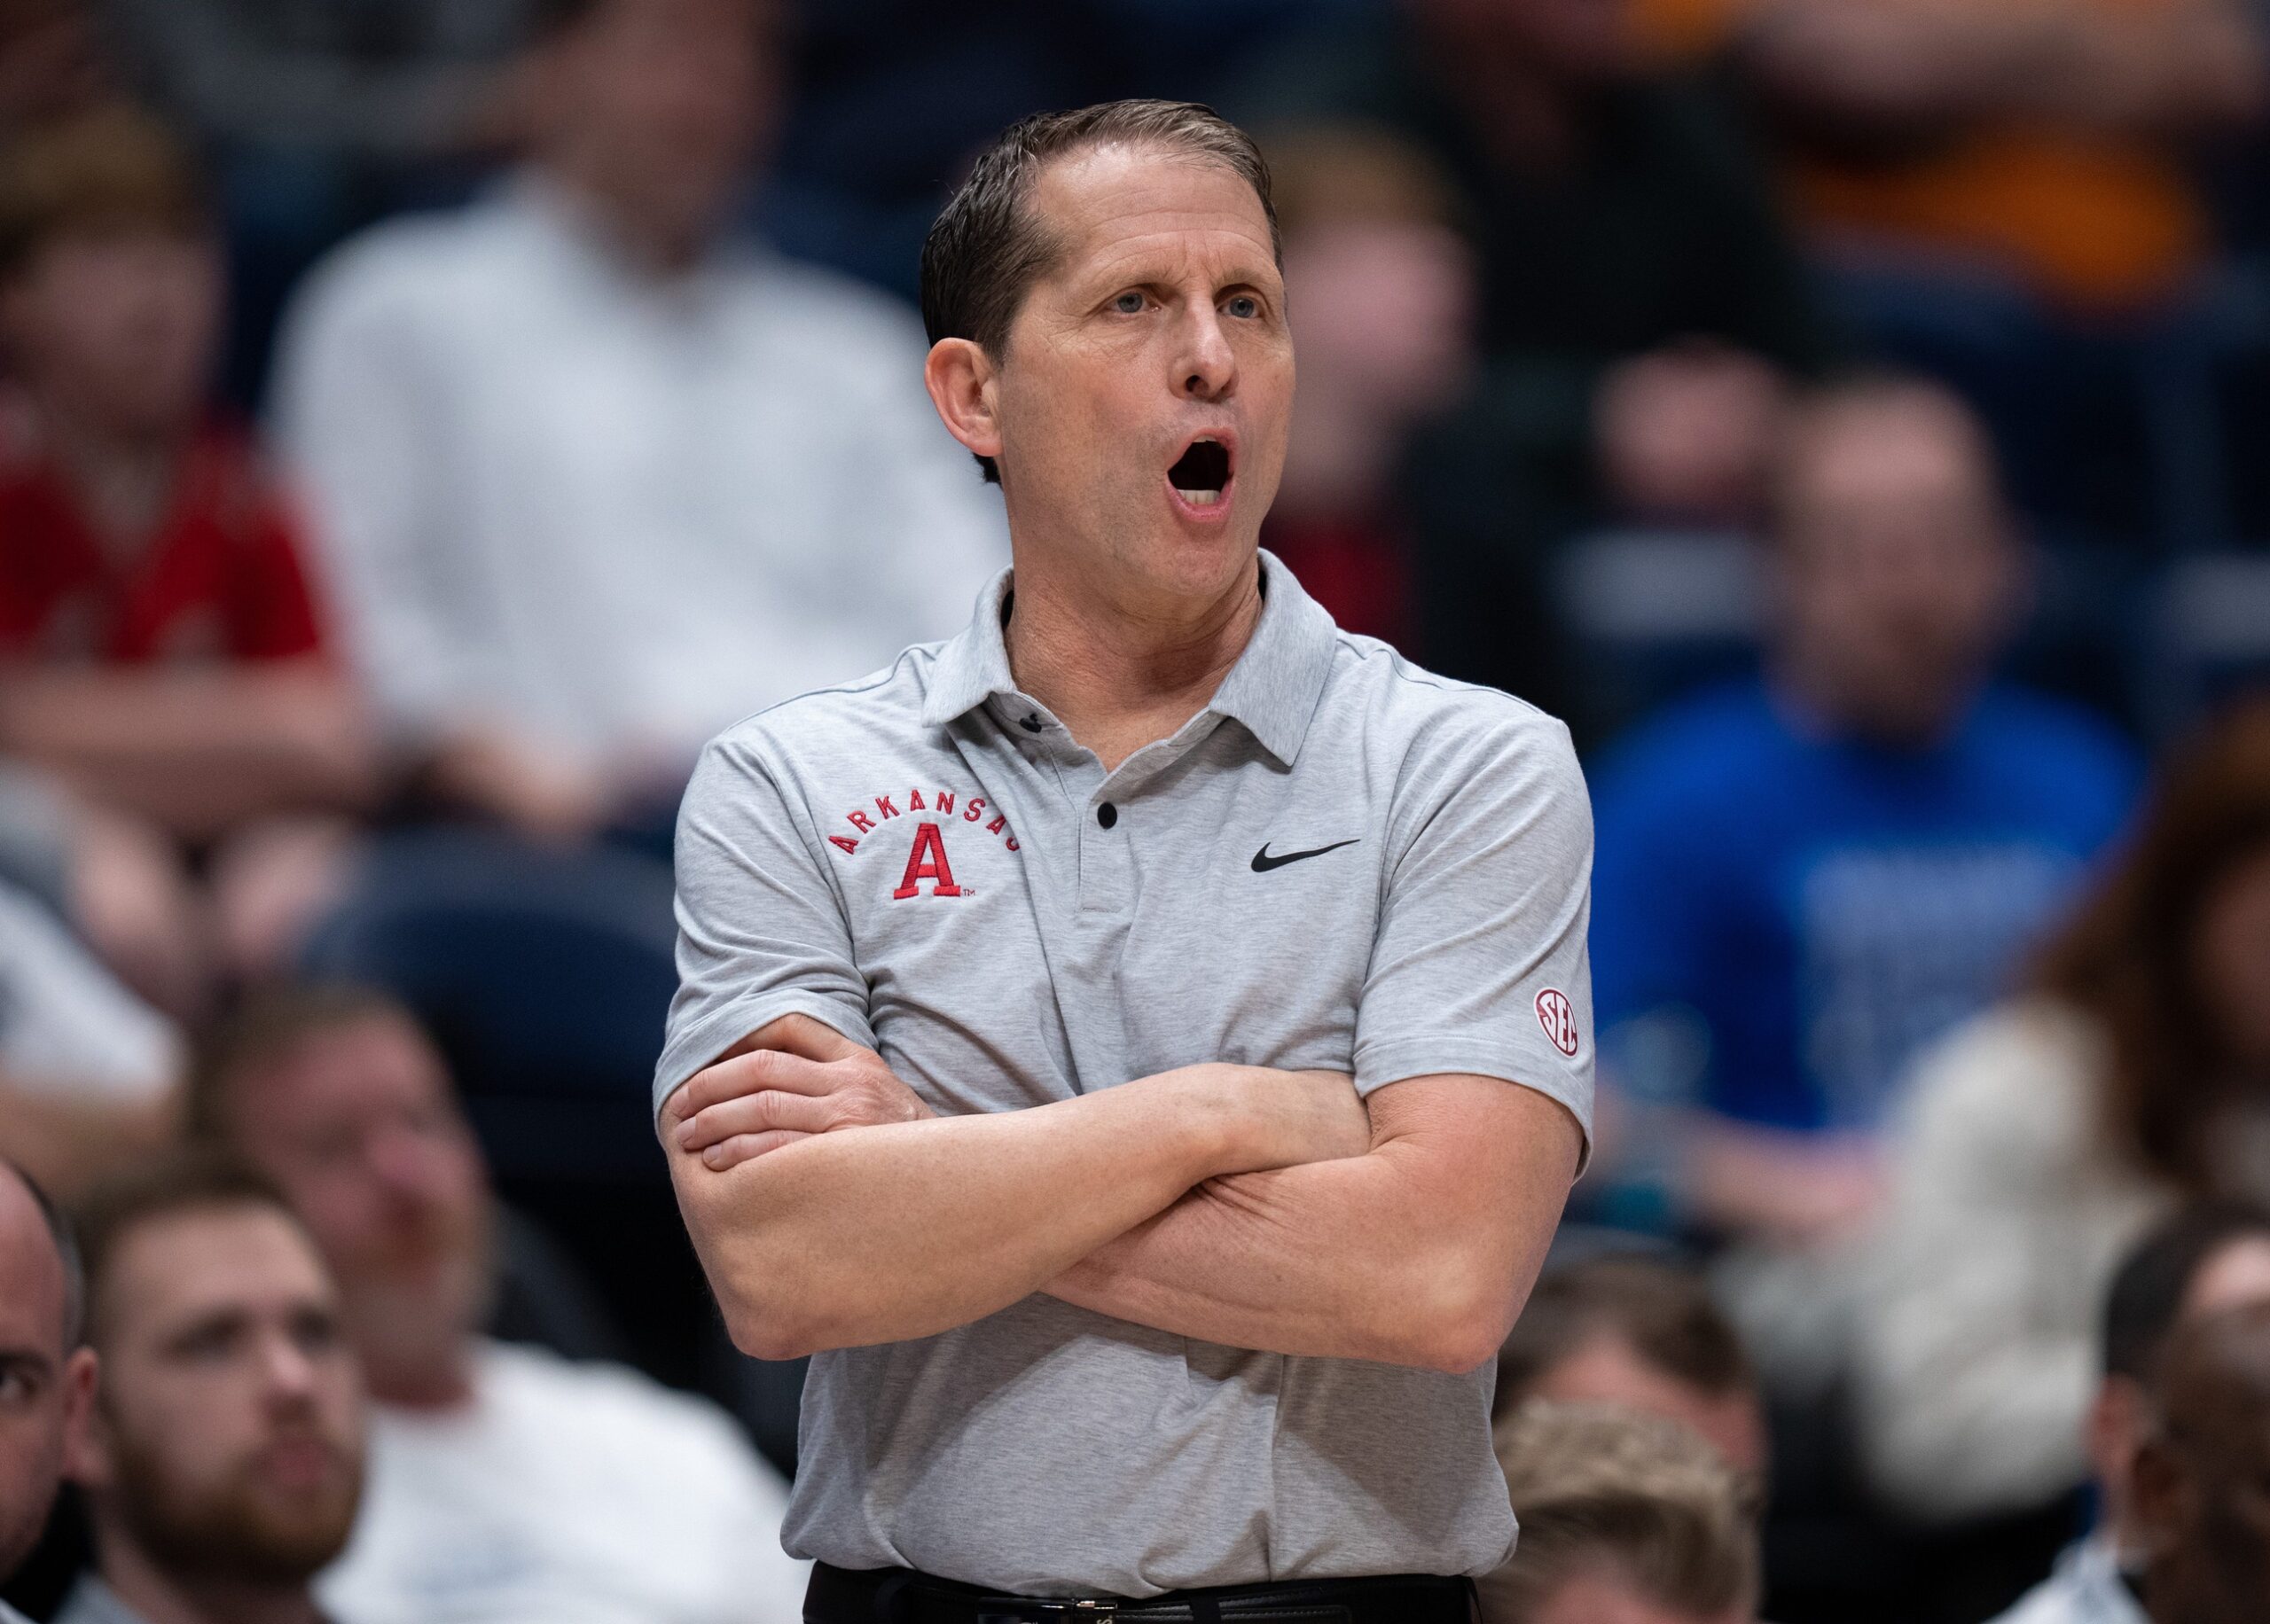 Arkansas head coach is a question mark after Eric Musselman leaves.